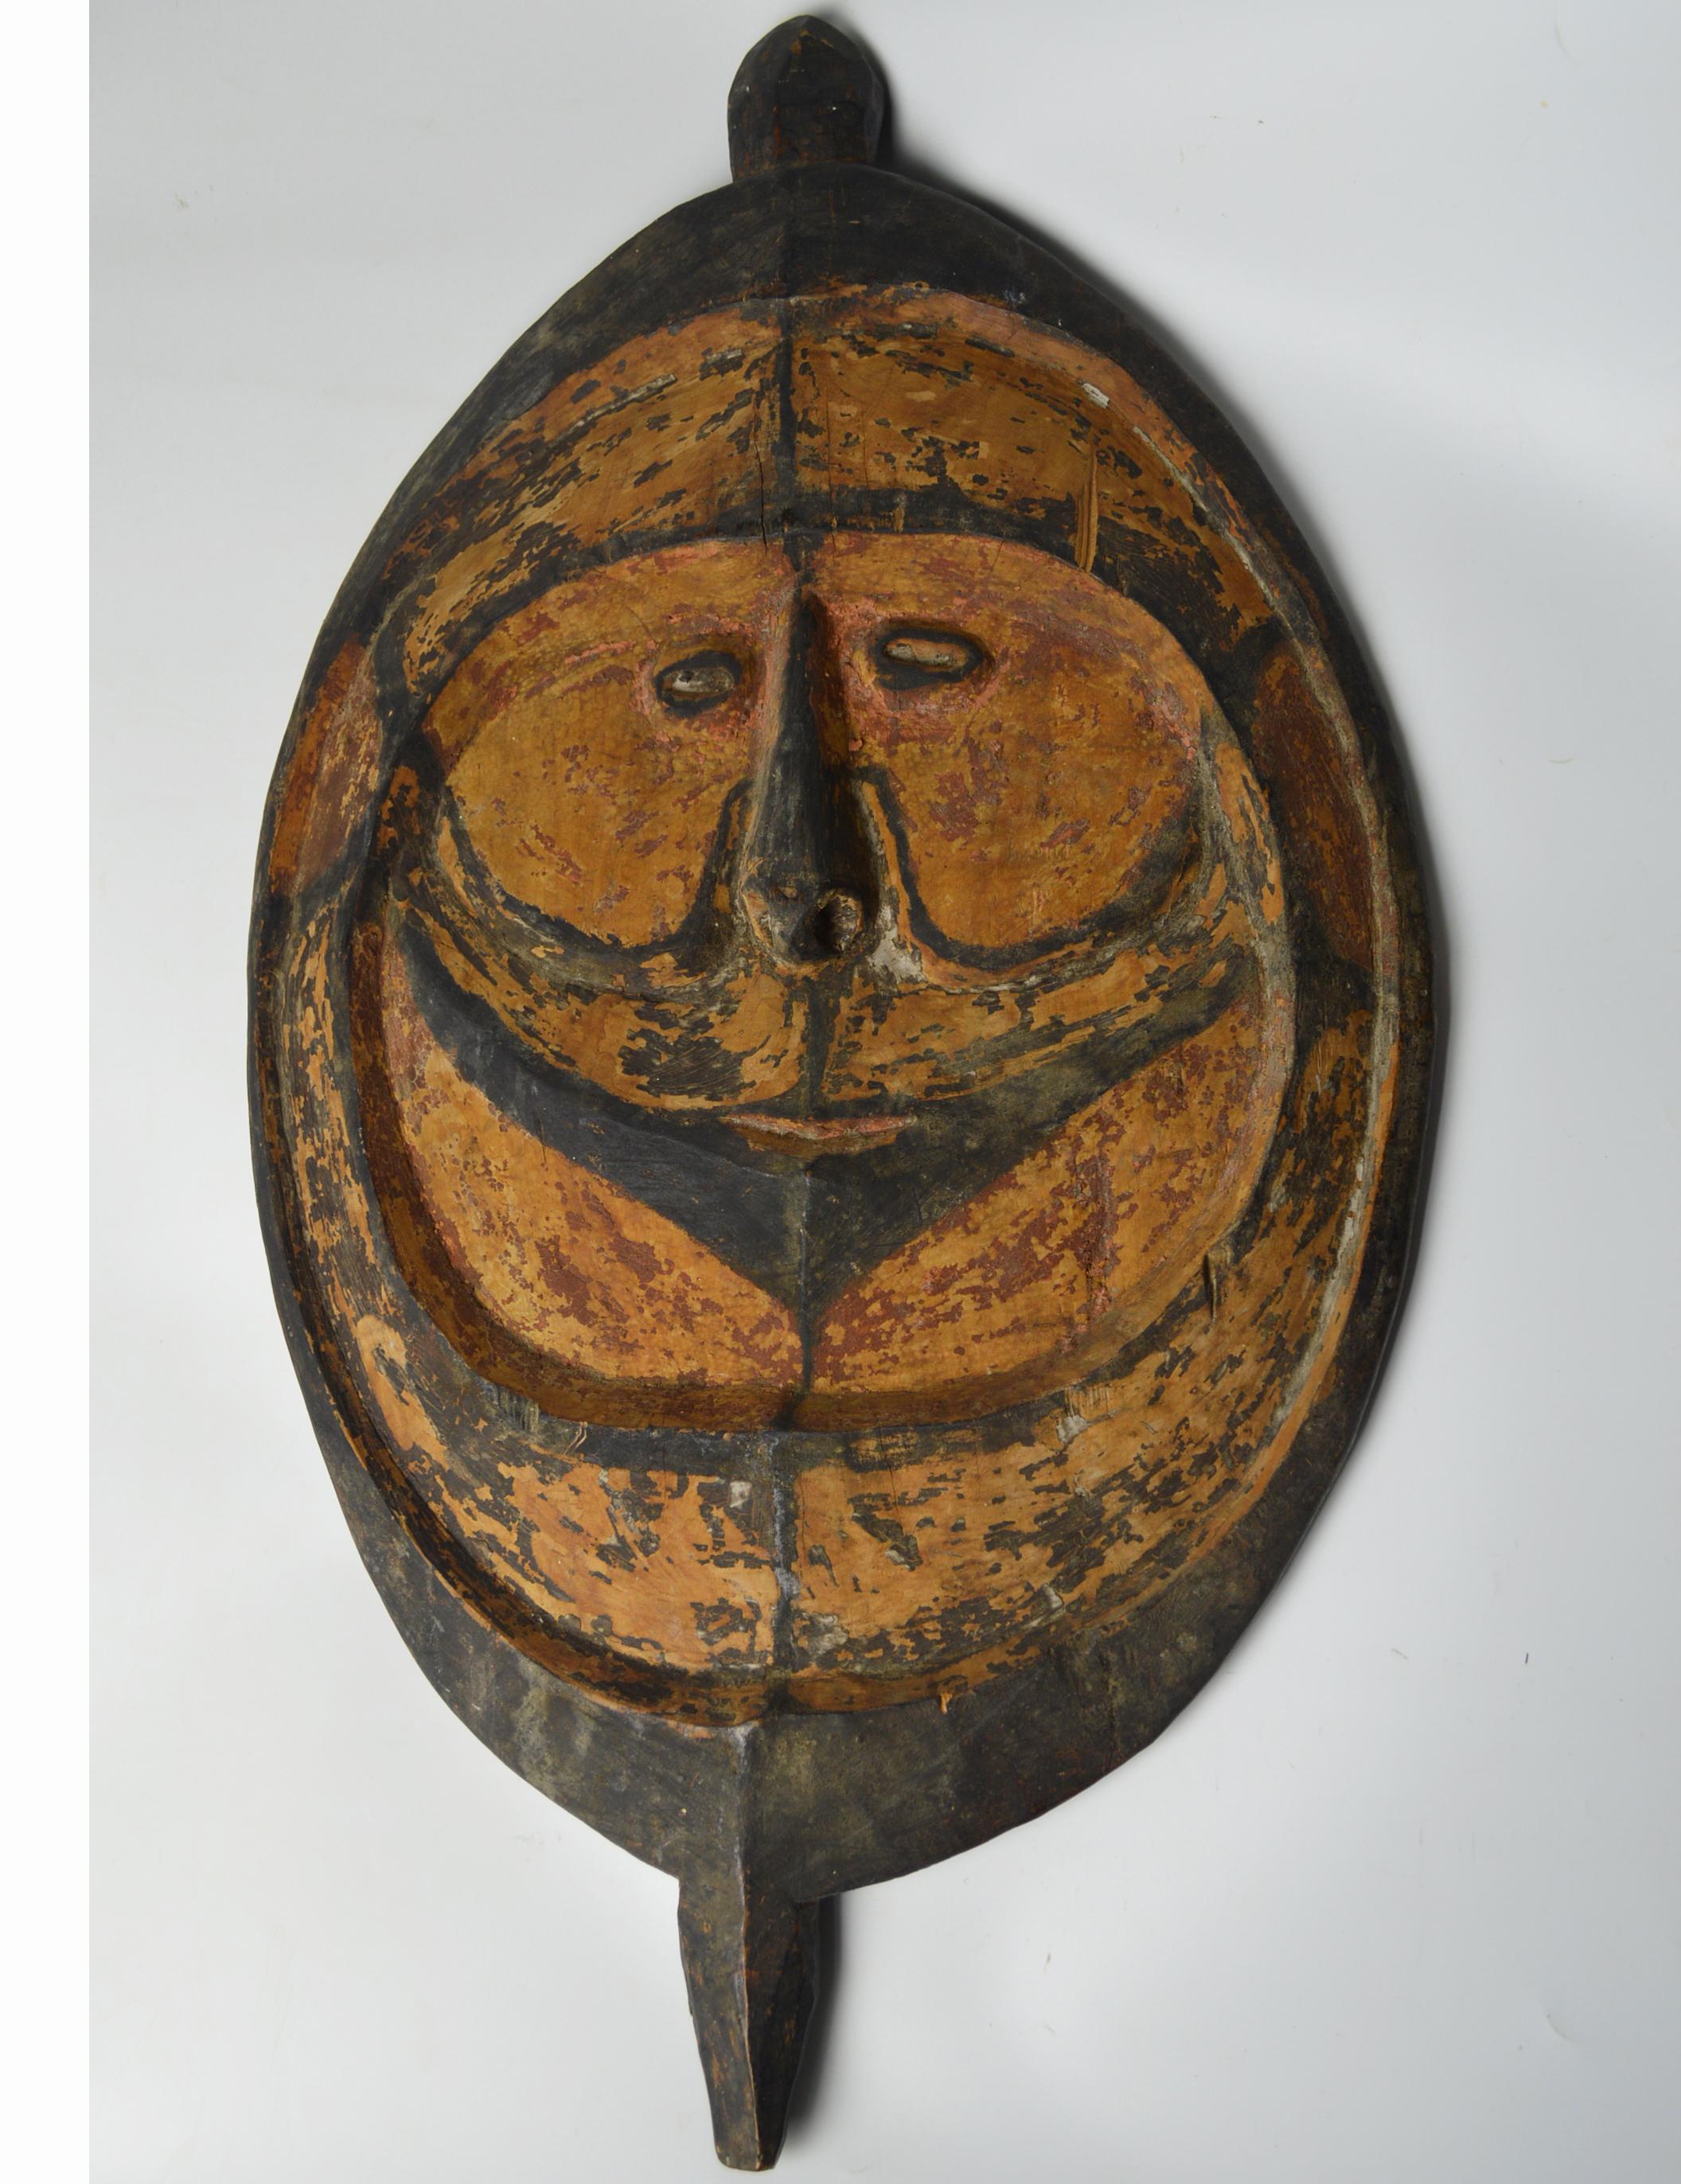 Large hard wood gable mask Ramu River Papua
Large disc shaped gable mask from the Ramu river Papua new Guinea
Carved hard heavy wood with applied pigments
Period early-mid 20th century
Ex Uk collection
Size 25 x 14 x 3 inches 64 x 36 cm.